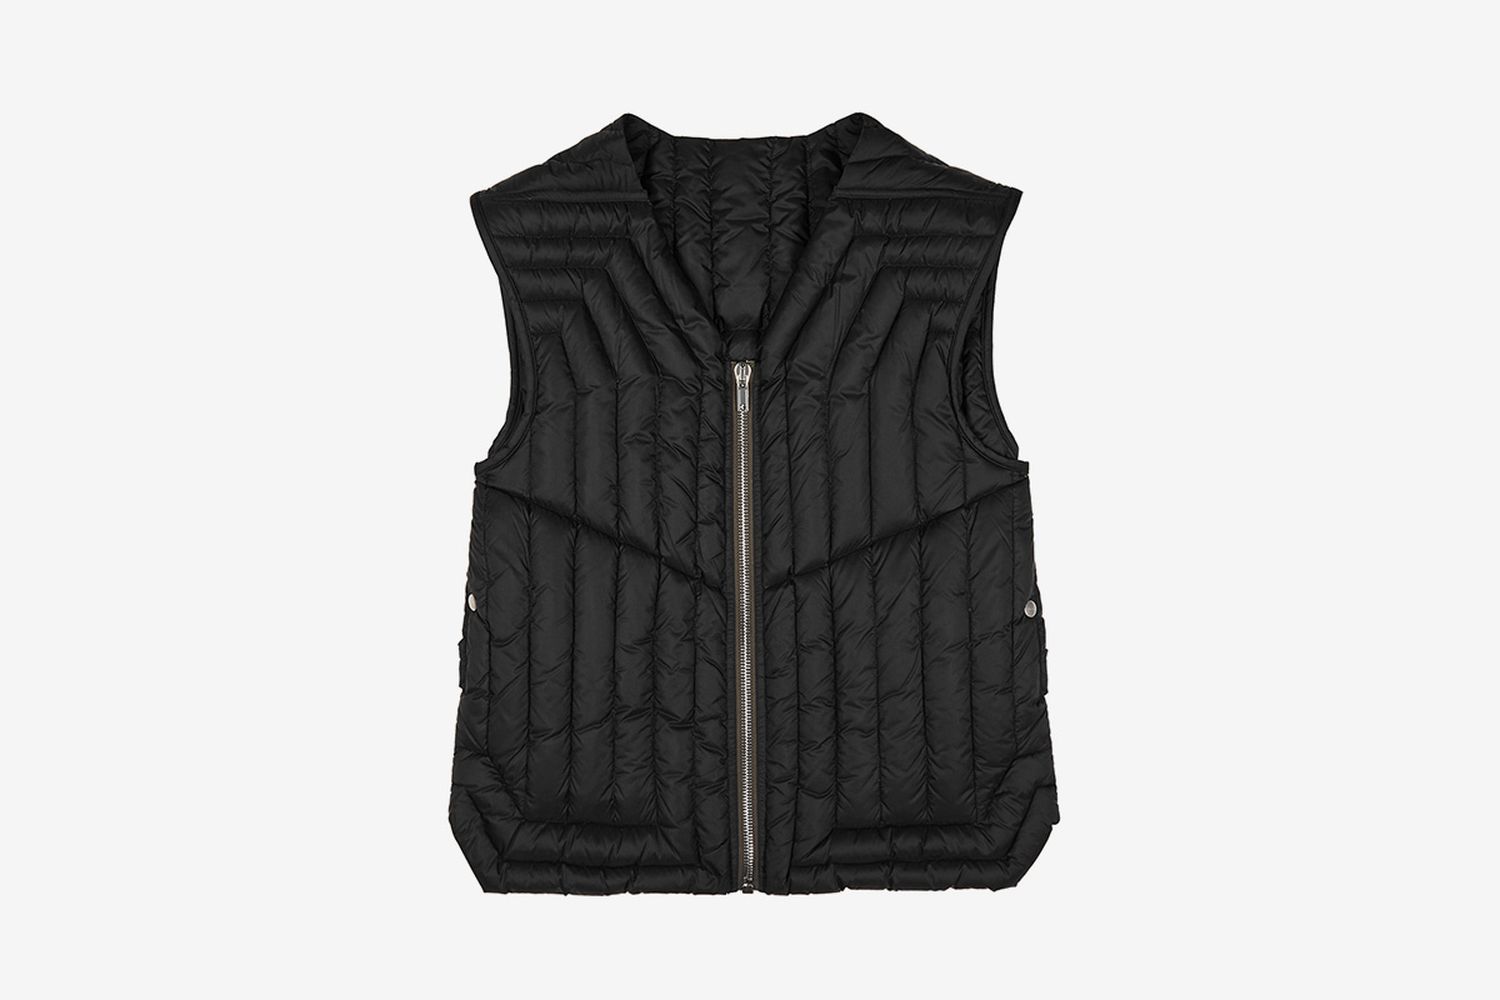 The Best Winter Vests to See You Through Winter 2021